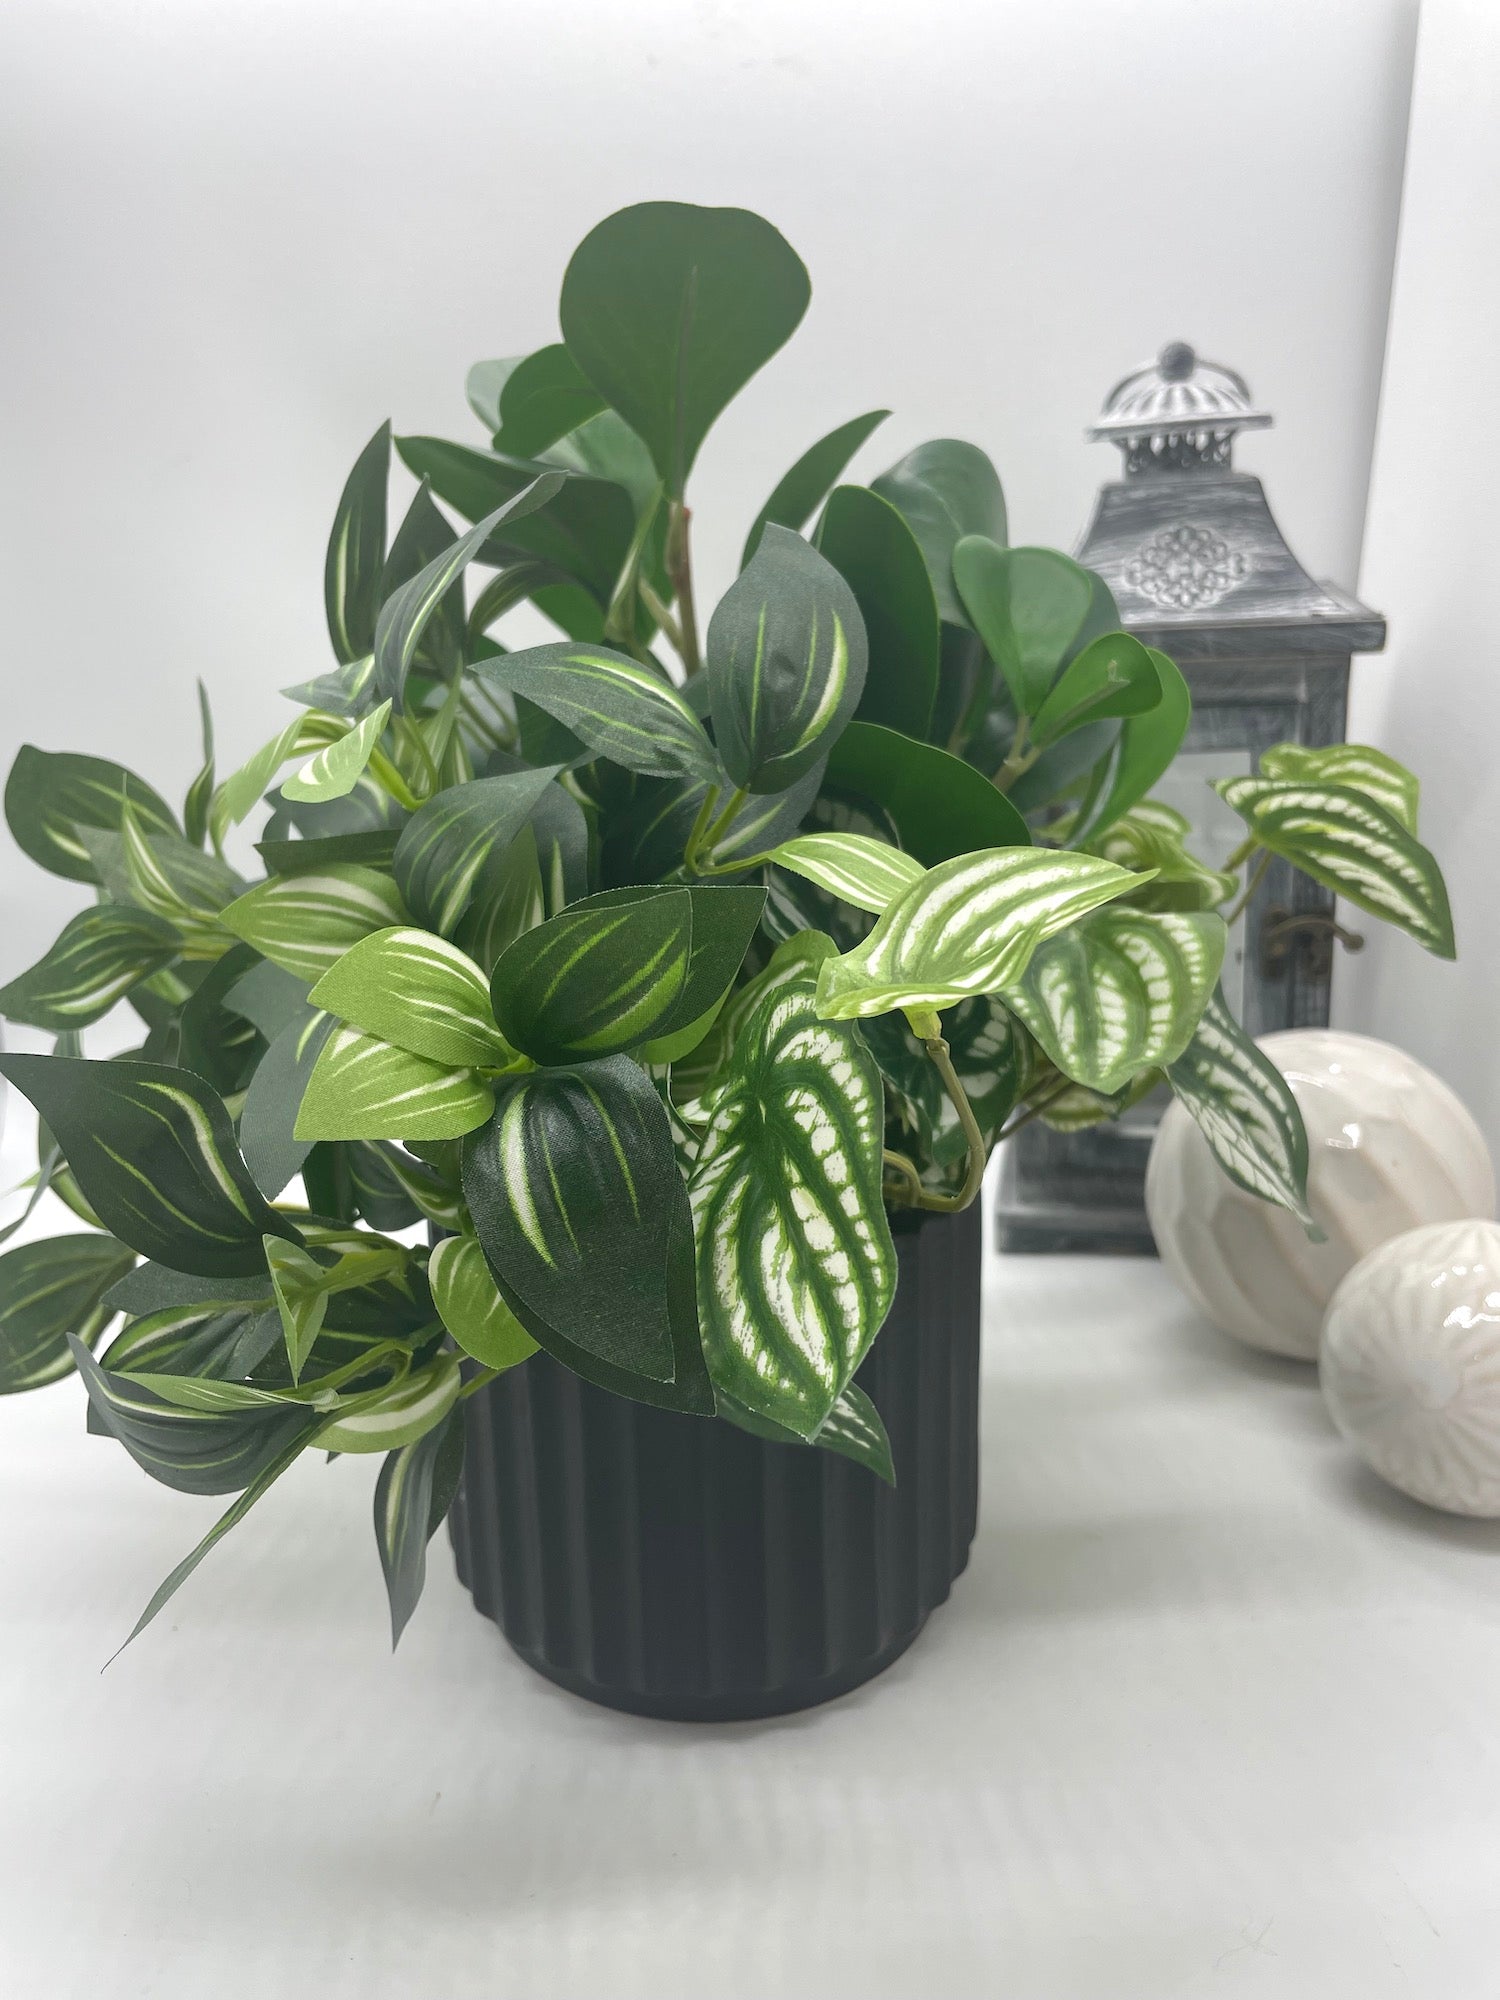 Fake Plants Home Decor, Lifelike Rare House Plants, Artificial Plant Mix in Black Ceramic Pot, Elegant Silk Greenery in Green and Green-White Colors, Faux Plants for Bathroom, Bedroom, Kitchen, Living Room